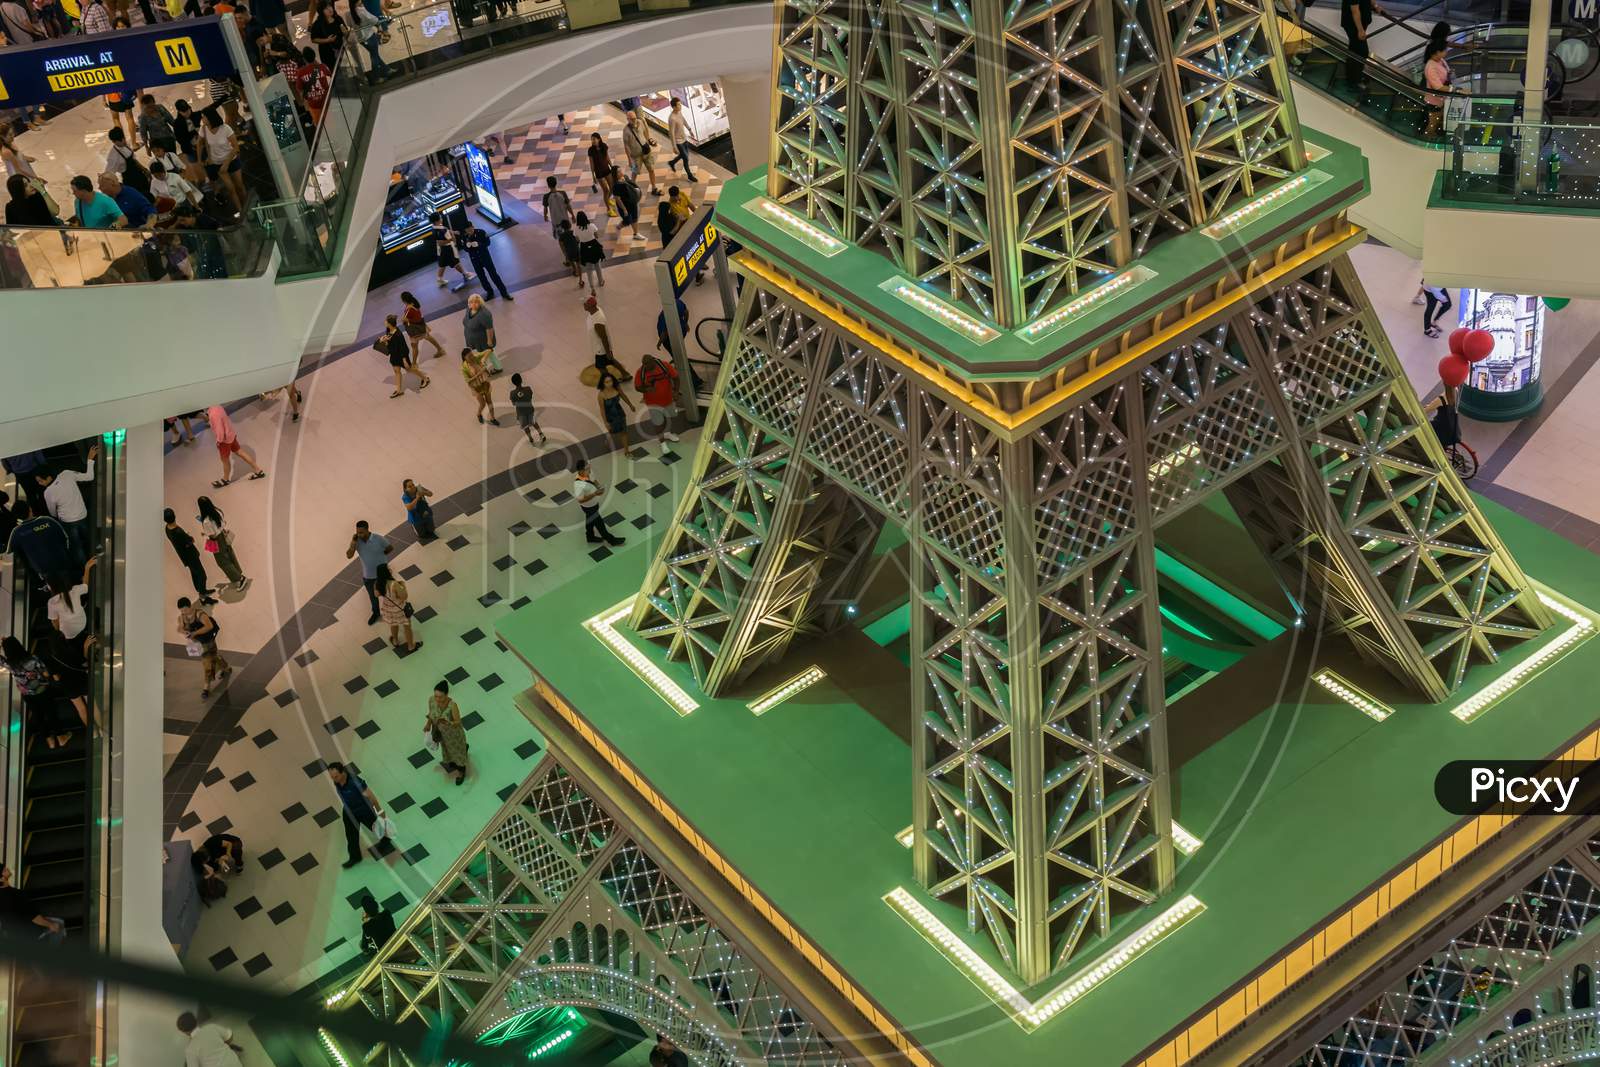 Pattaya,Thailand - October 19,2018: Terminal 21 This Is A Smaller Replica Of The Eifel Tower.It Reaches From The Ground Floor To The Roof.Terminal 21 Is A Big,Modern Shopping Mall With Many Shops And Restaurants.